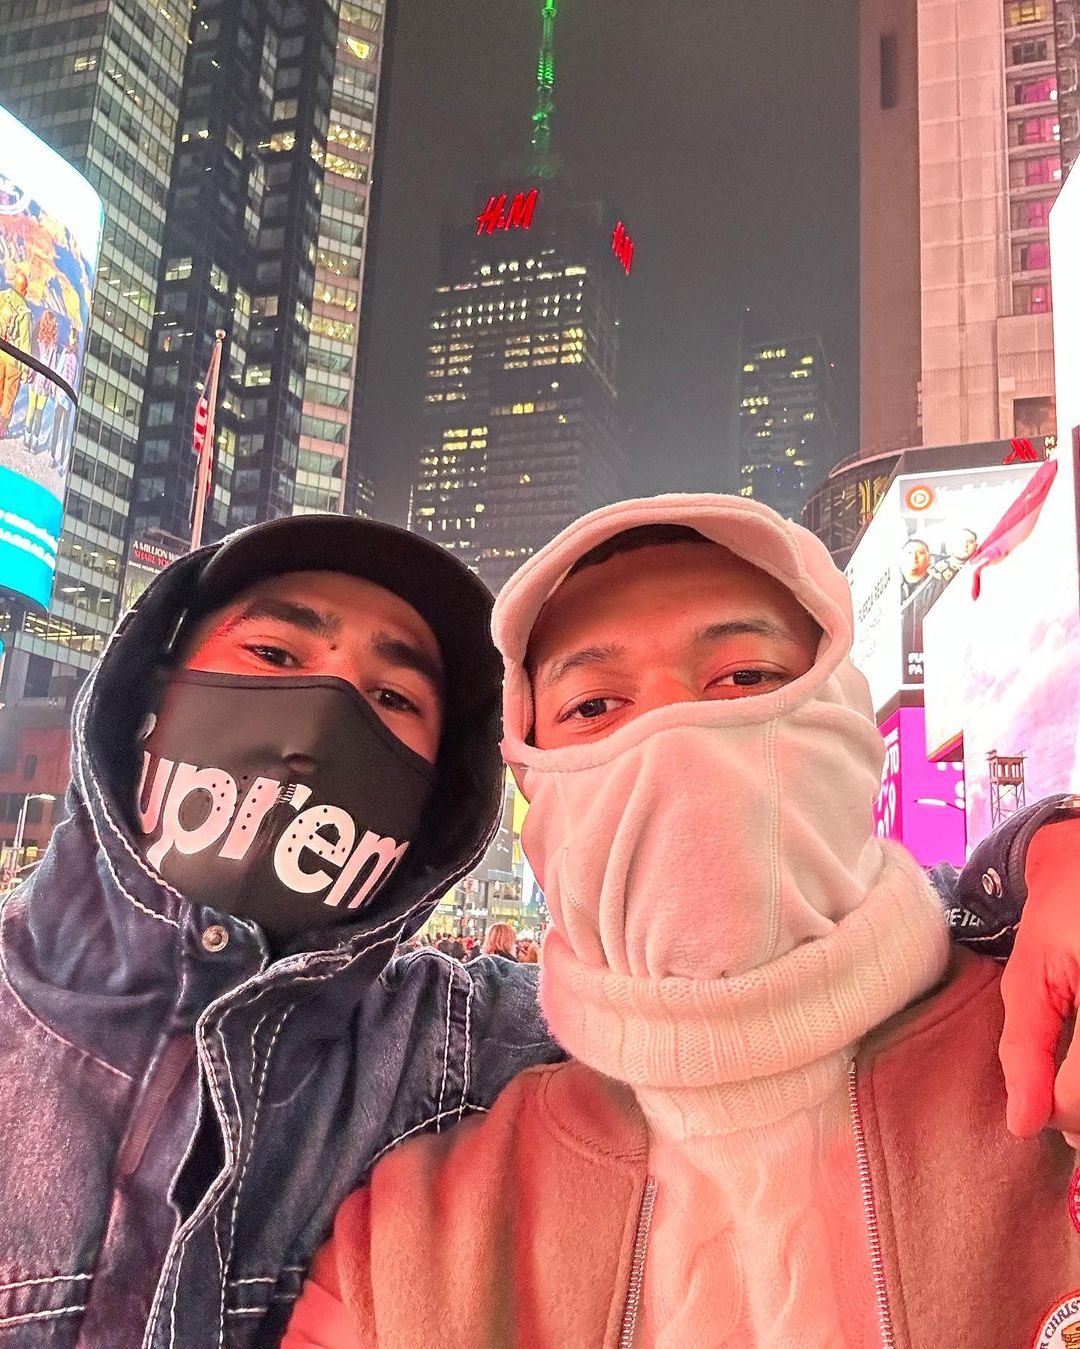 Mbappé e Hakimi in vacanza a New York in incognito - Instagram/Kylian Mbappé